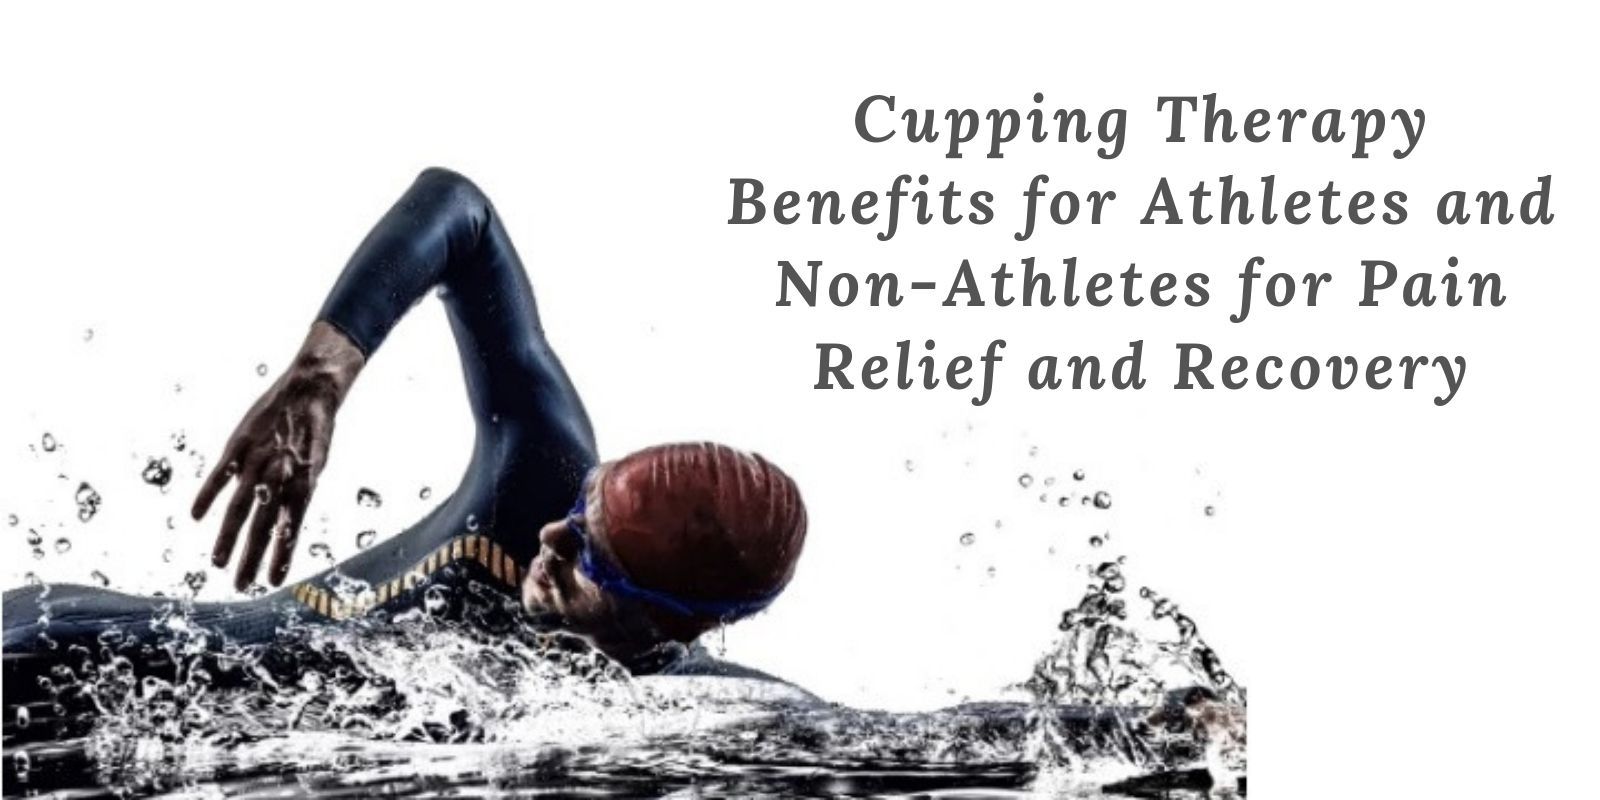 Cupping Therapy Benefits for Athletes and Non Athletes for Pain Relief